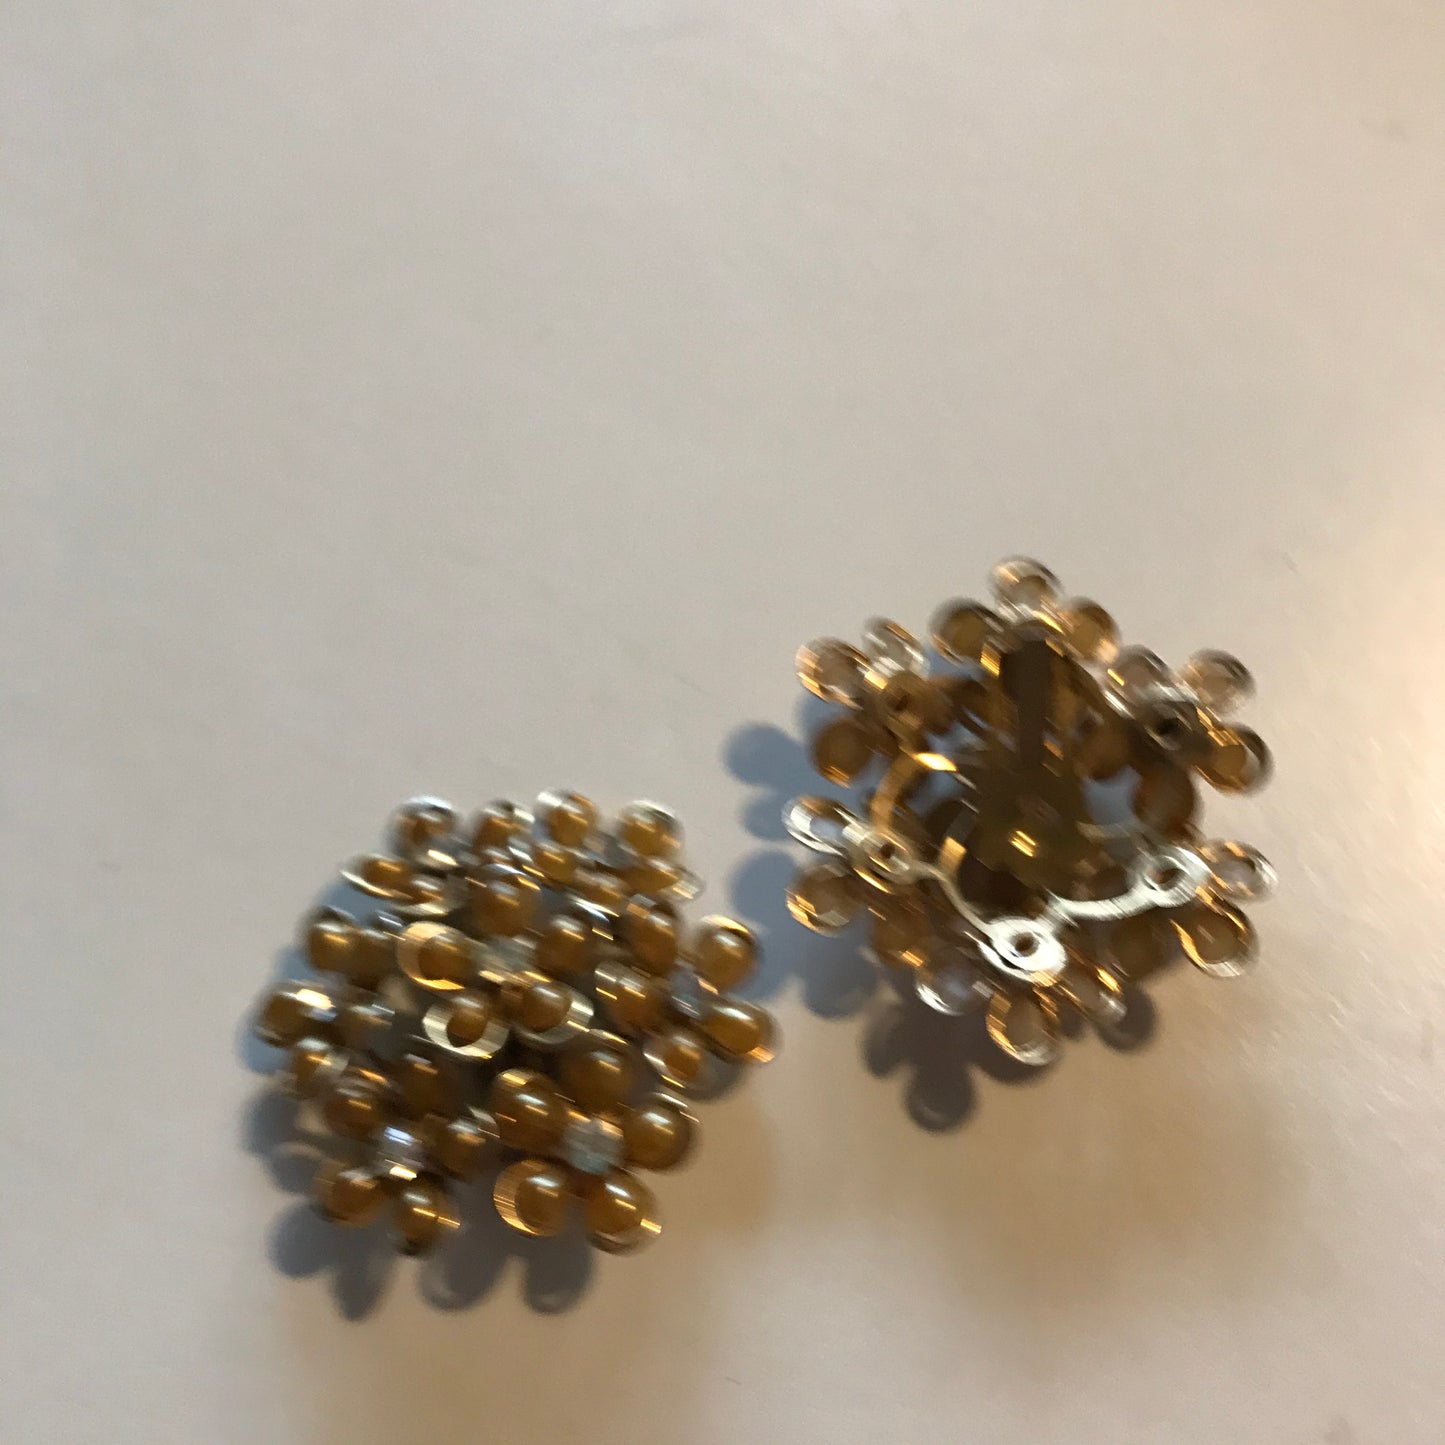 Golden Celluloid and Rhinestone Flower Clip Earrings circa 1950s